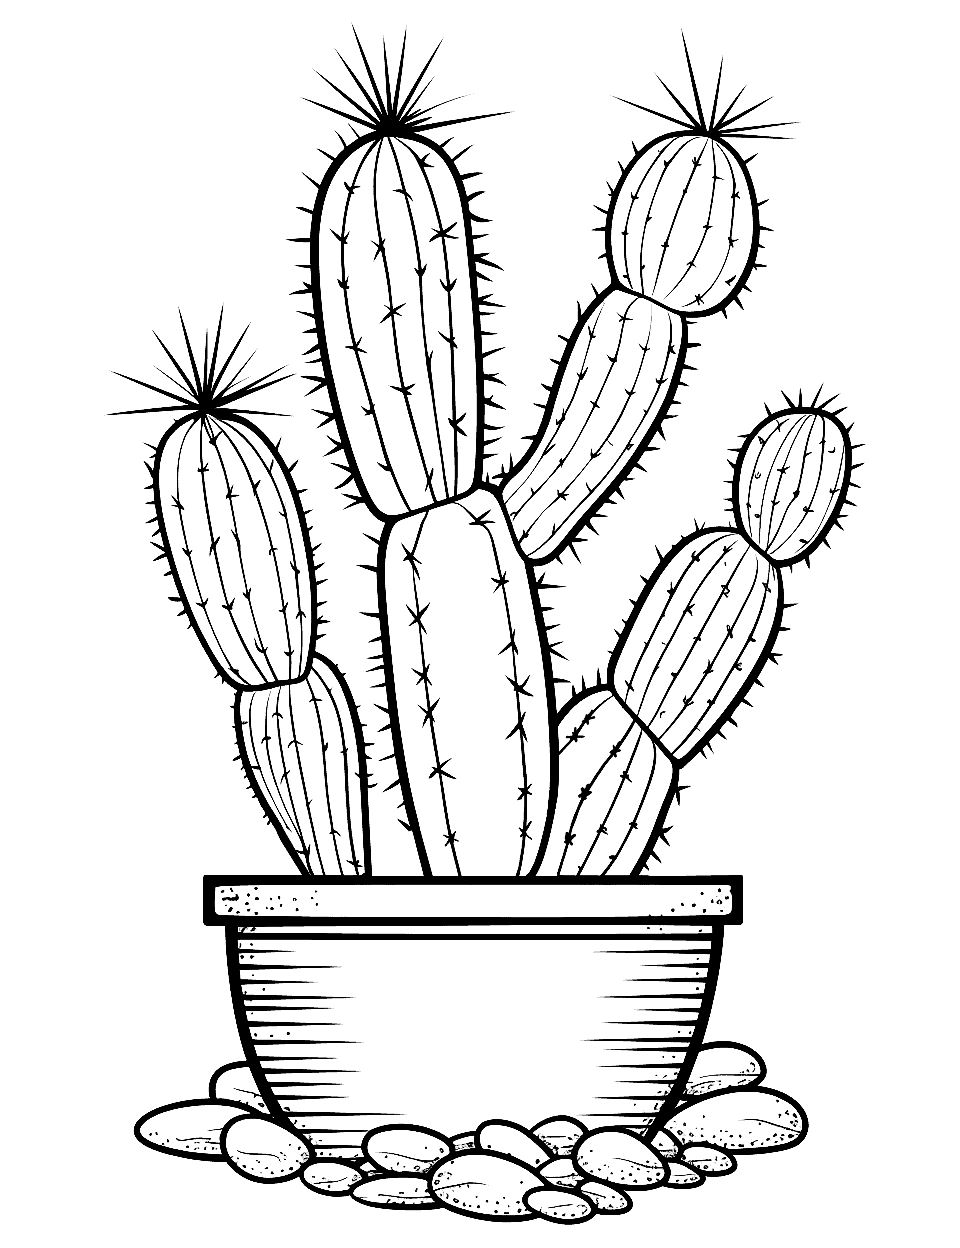 Cactus with Desert Decorations Coloring Page - A cactus surrounded by desert-themed decorations like rocks.